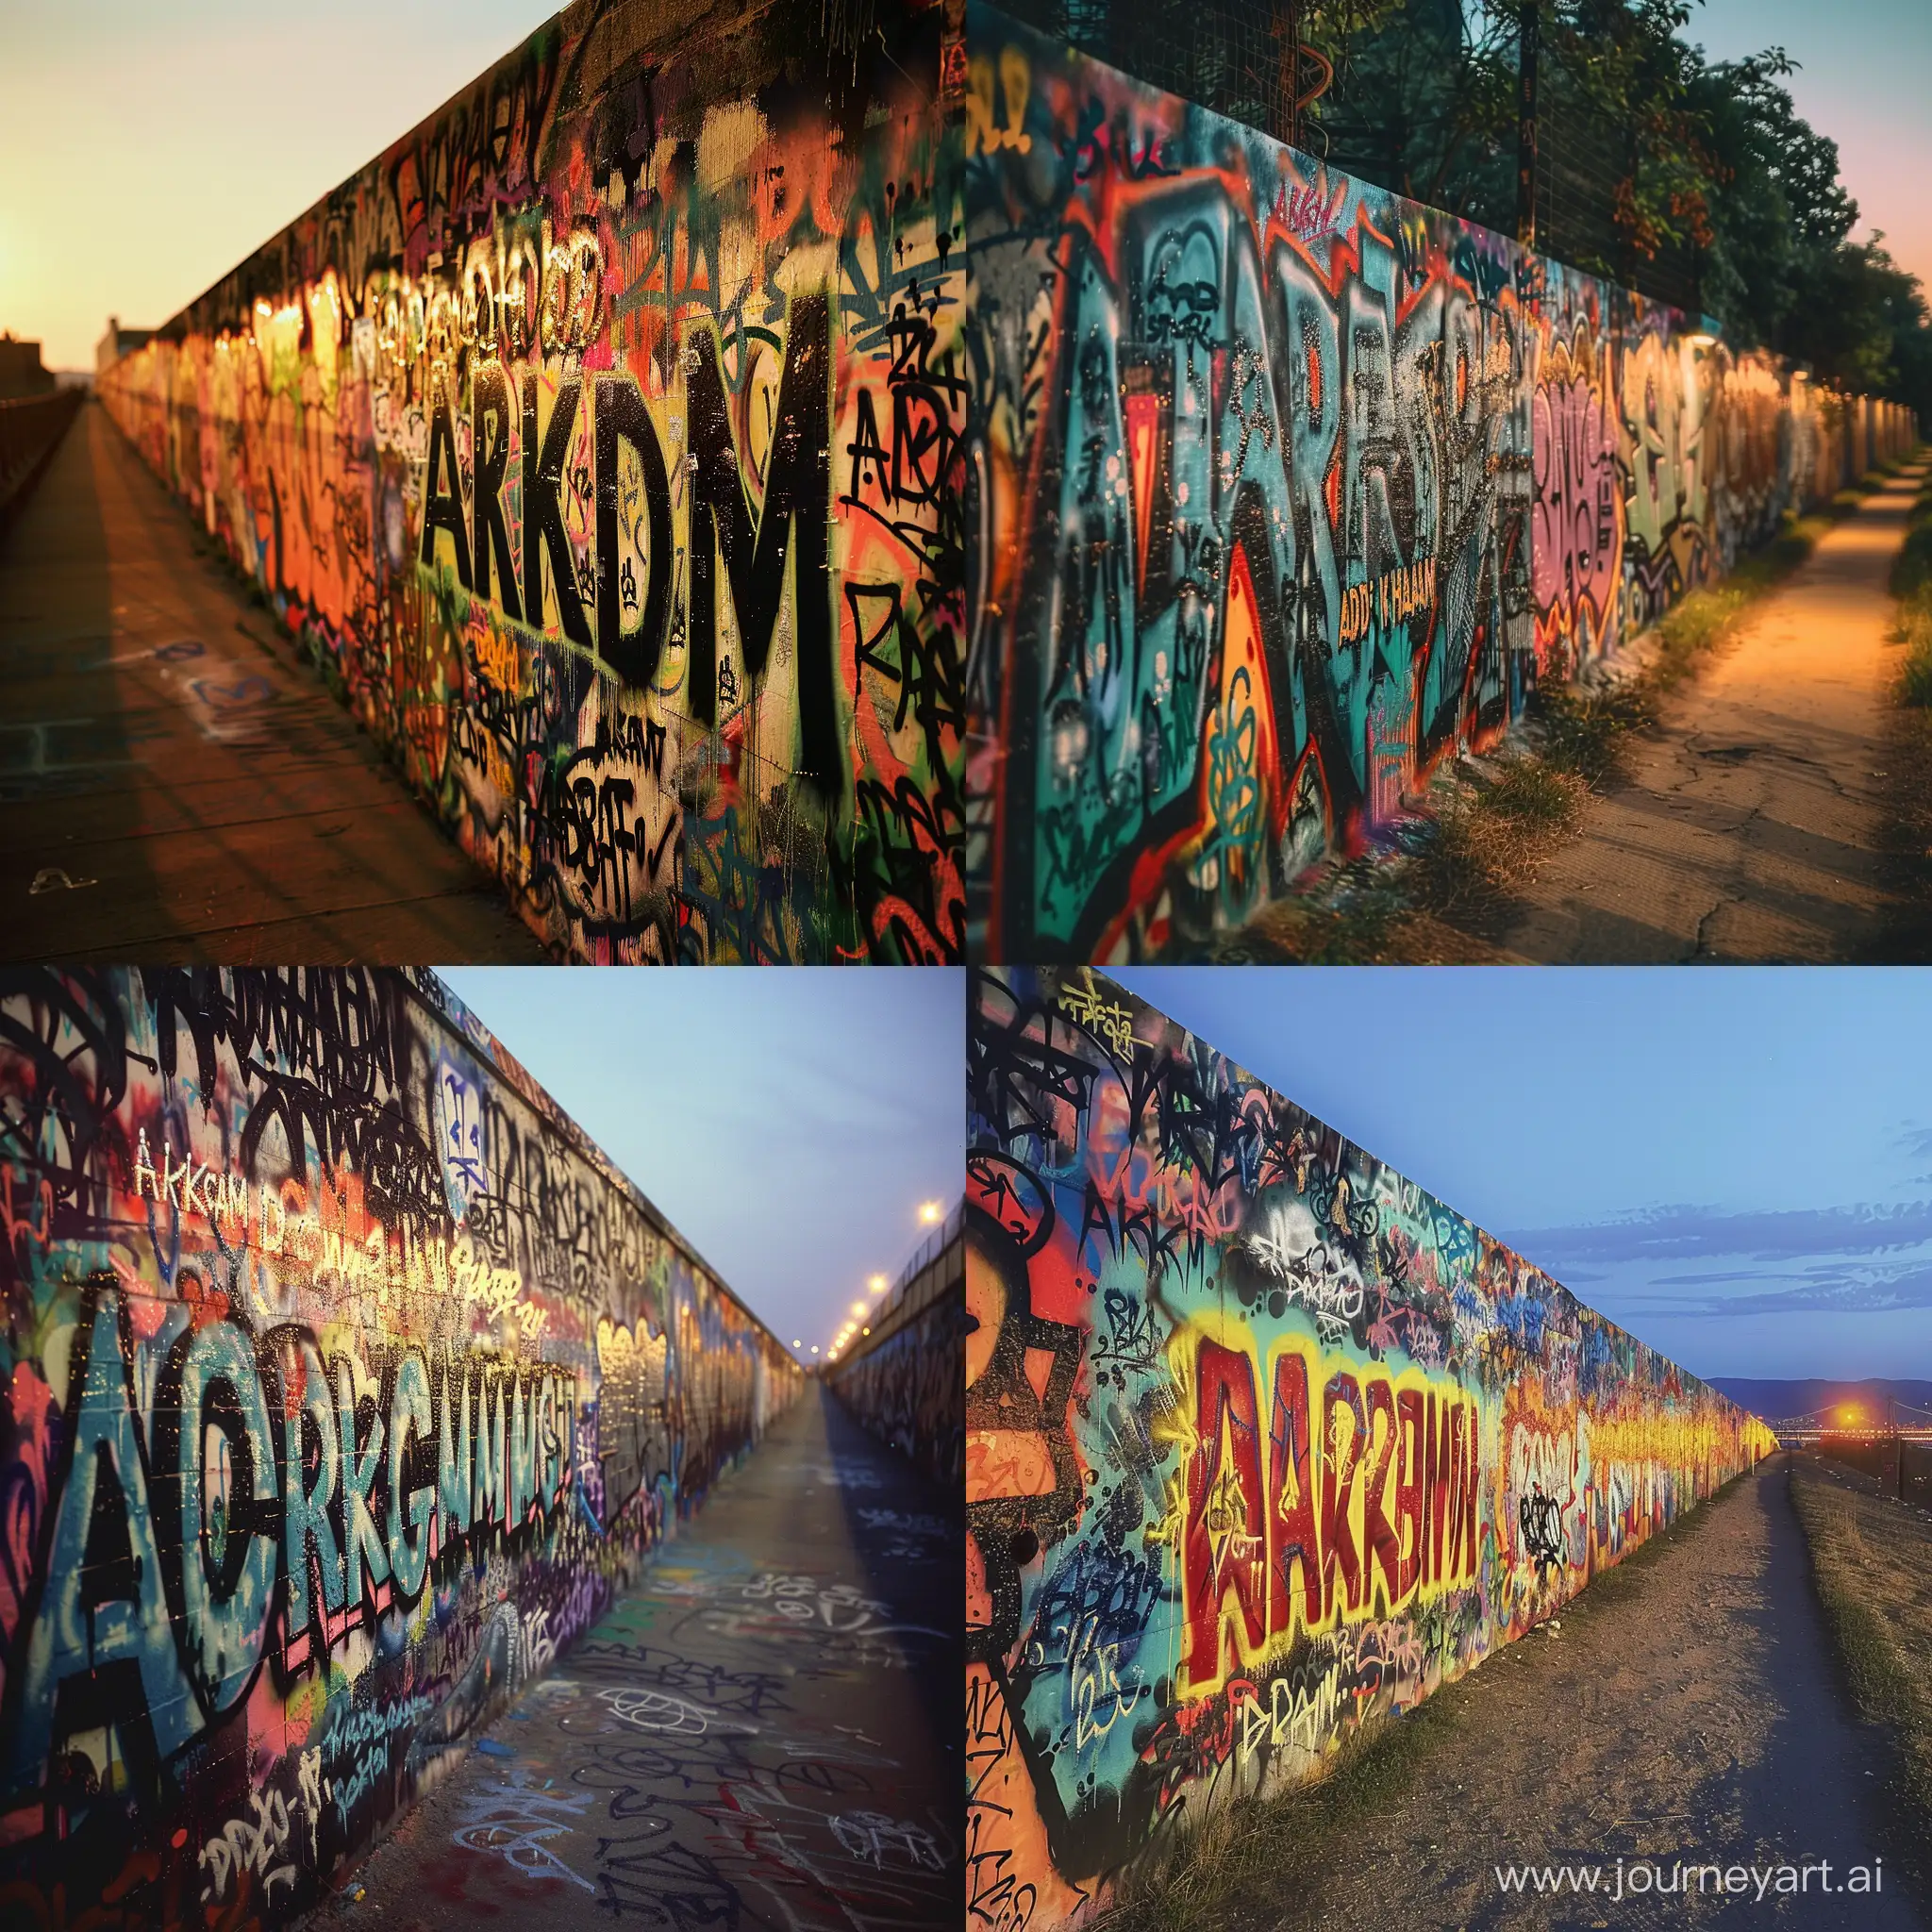 Gotham in the night, There is a wall along the way, full of graffiti, and in the middle the graffiti says ARKHAM, Generate an image showcasing a straight, uninterrupted wall extending from the left to the right of the frame. The wall is covered with vibrant graffiti, featuring a rich tapestry of colors and tags 'adi paw' under the warm glow of evening light. The path alongside the wall is clear and leads the eye through the scene, emphasizing the linear perspective of the wall.